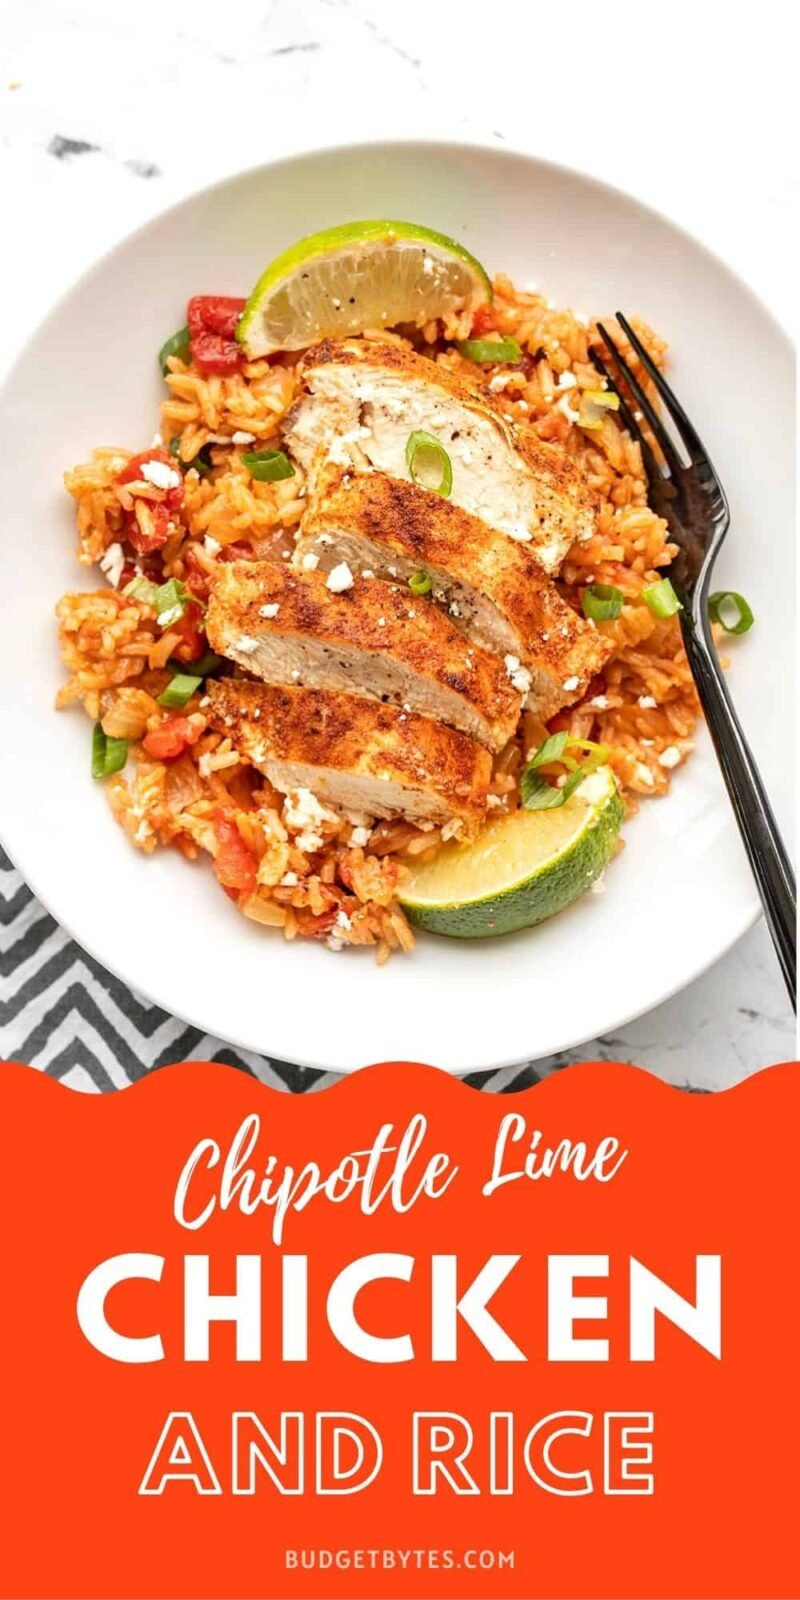 chipotle lime chicken and rice in a bowl, title text at the bottom